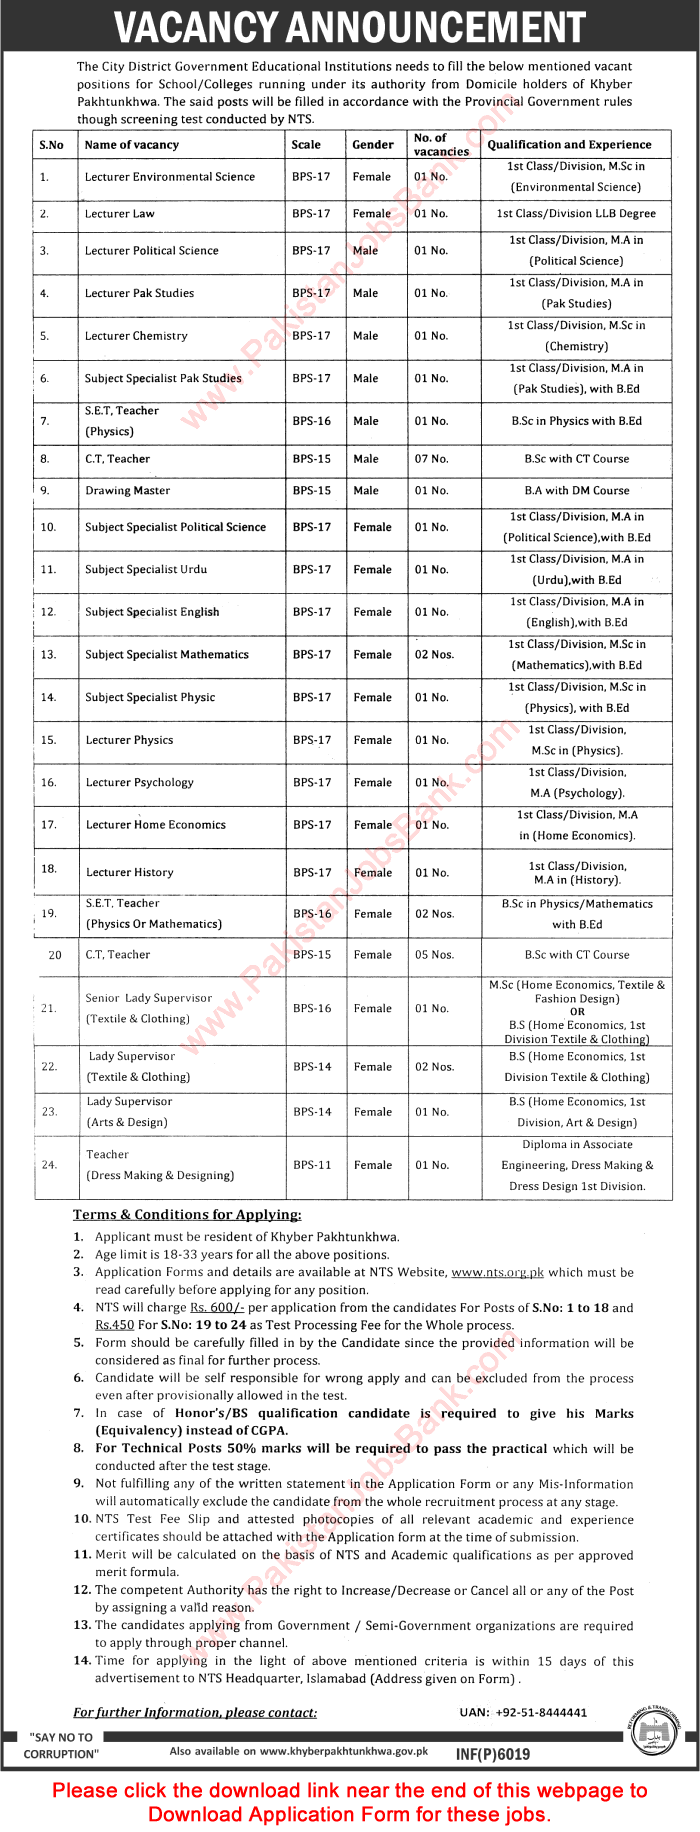 City District Government Educational Institutions KPK Jobs 2016 October NTS Application Form Latest